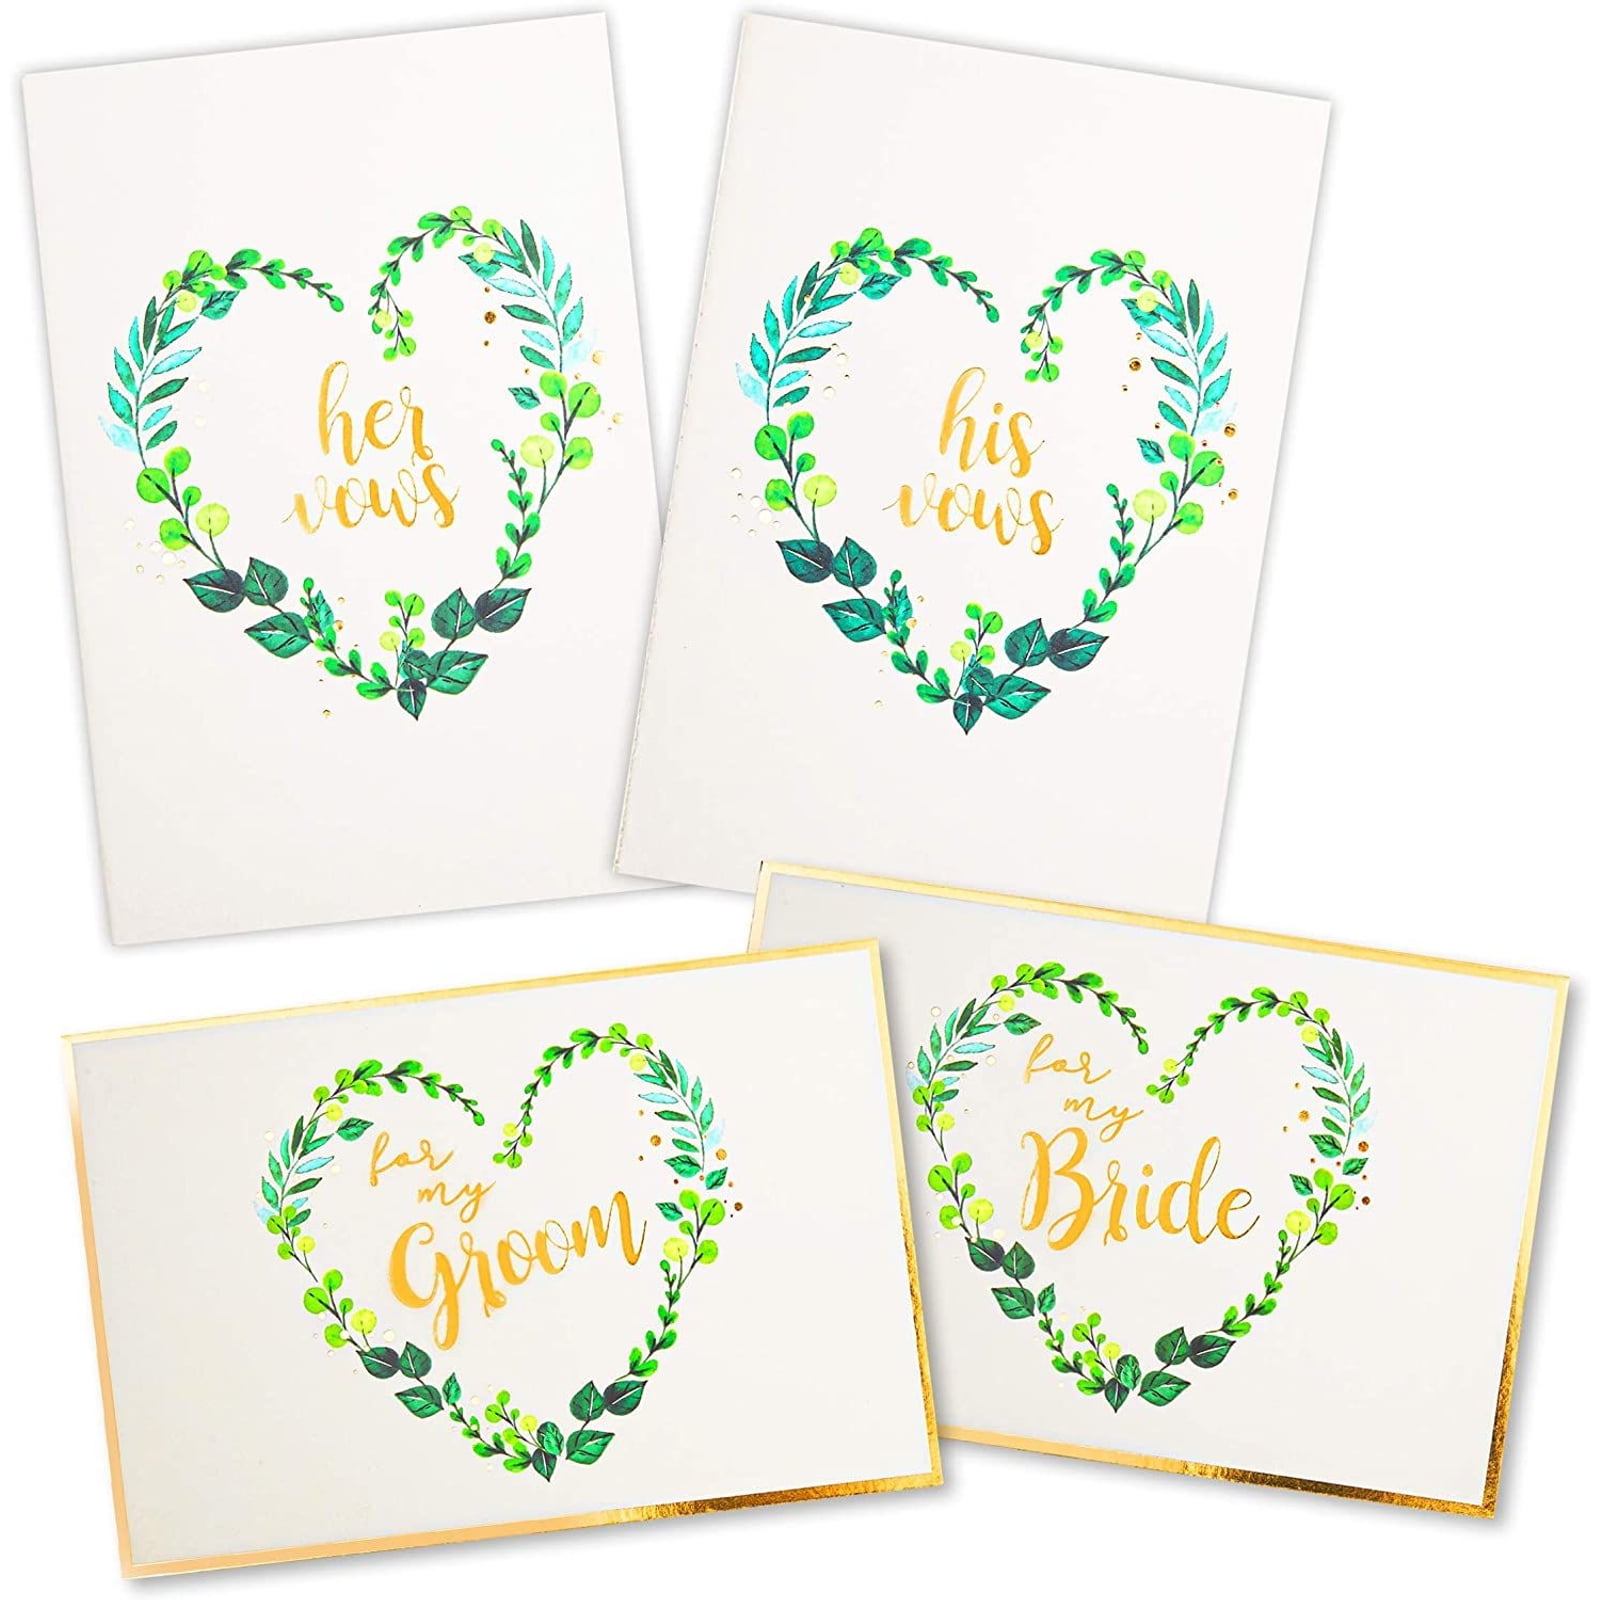 Blank Cards Cards for Wedding Congratulations Wedding Greeting Card Wedding Gifts Happily Ever After Gifts for Bride and Groom